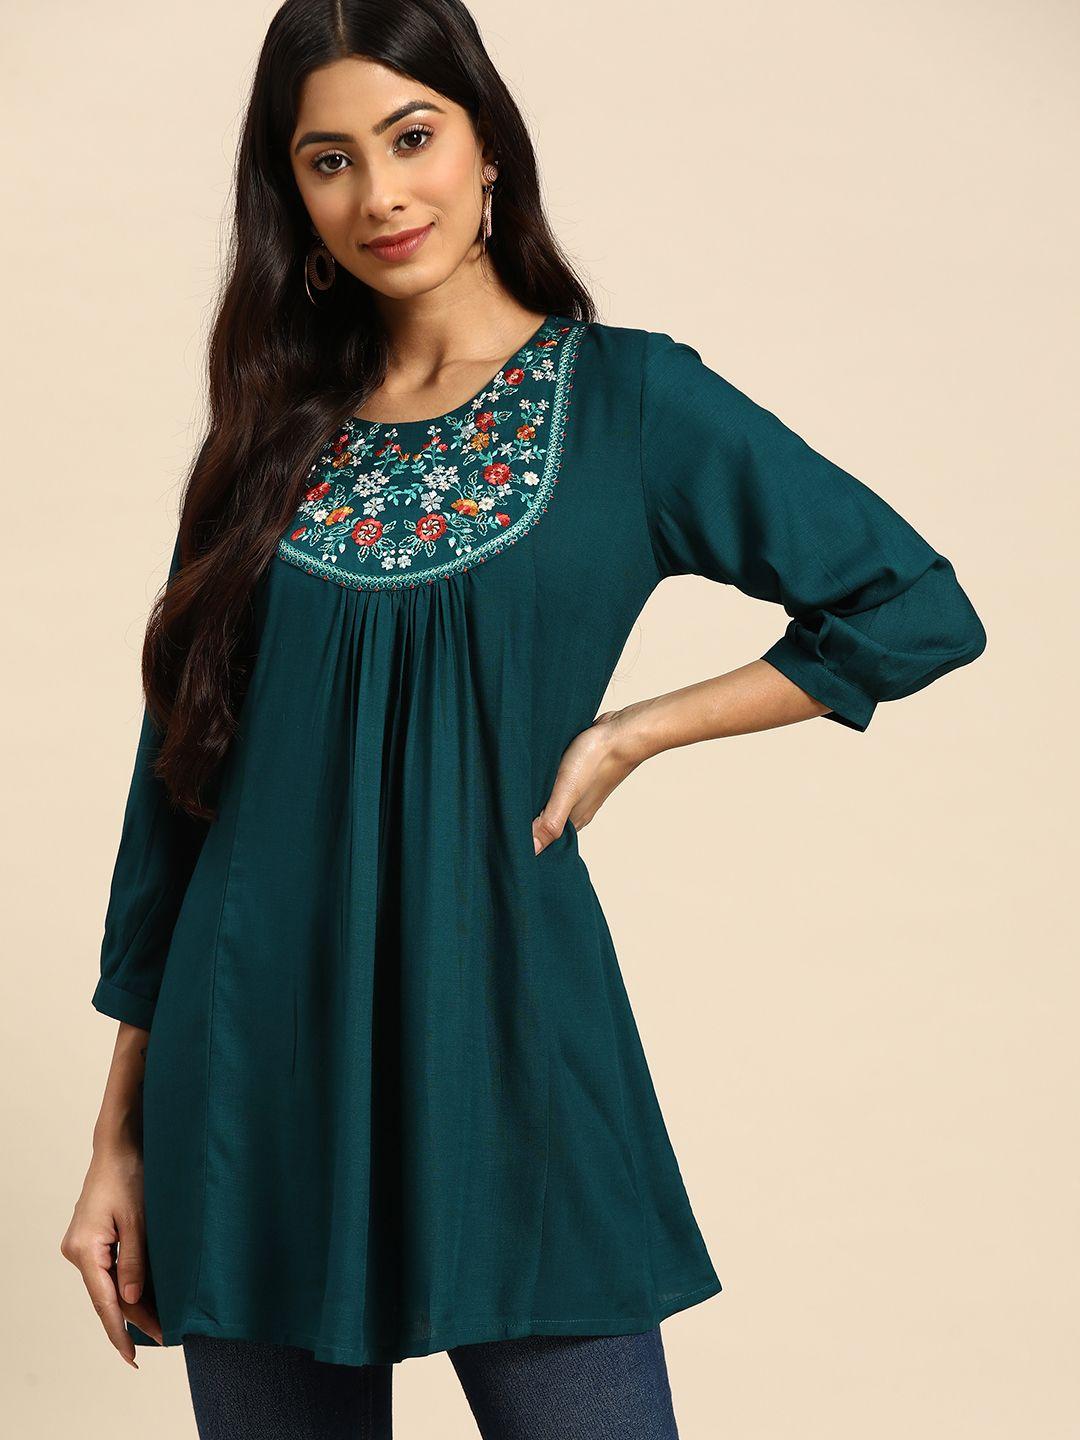 all about you teal floral embroidered longline top